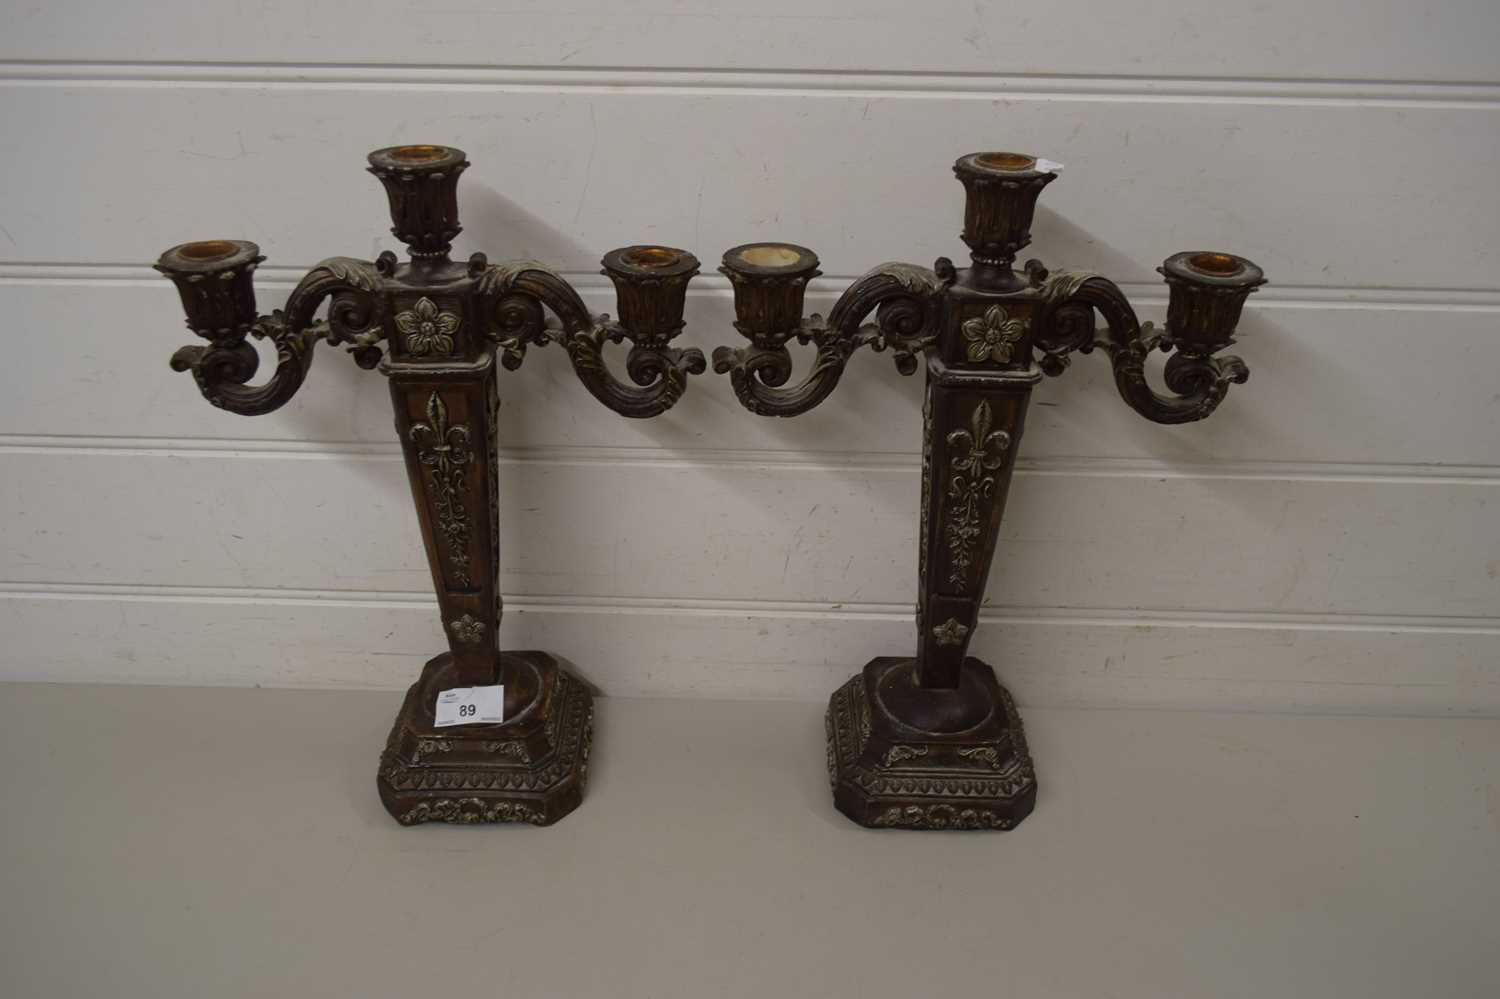 Lot 89 - PAIR OF BRONZED COMPOSITION CANDELABRA